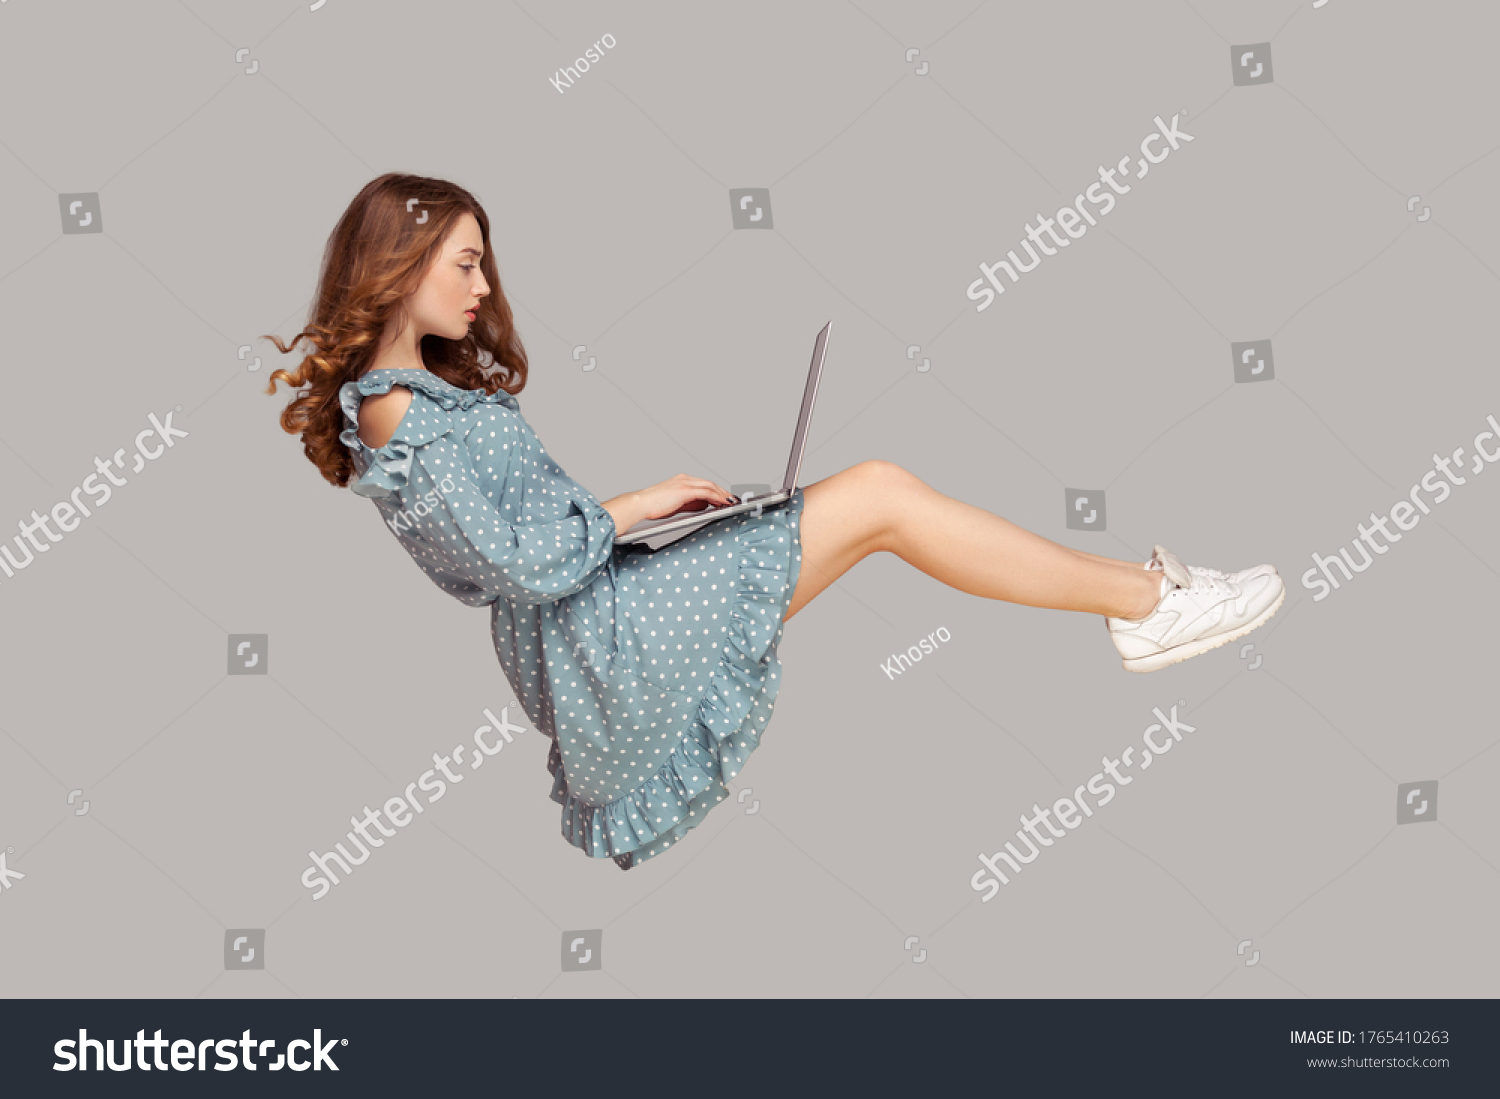 Hovering in air. Pretty girl ruffle dress levitating, typing keyboard using laptop for work online, surfing web social networks while flying in mid-air. indoor studio shot isolated on gray background #1765410263